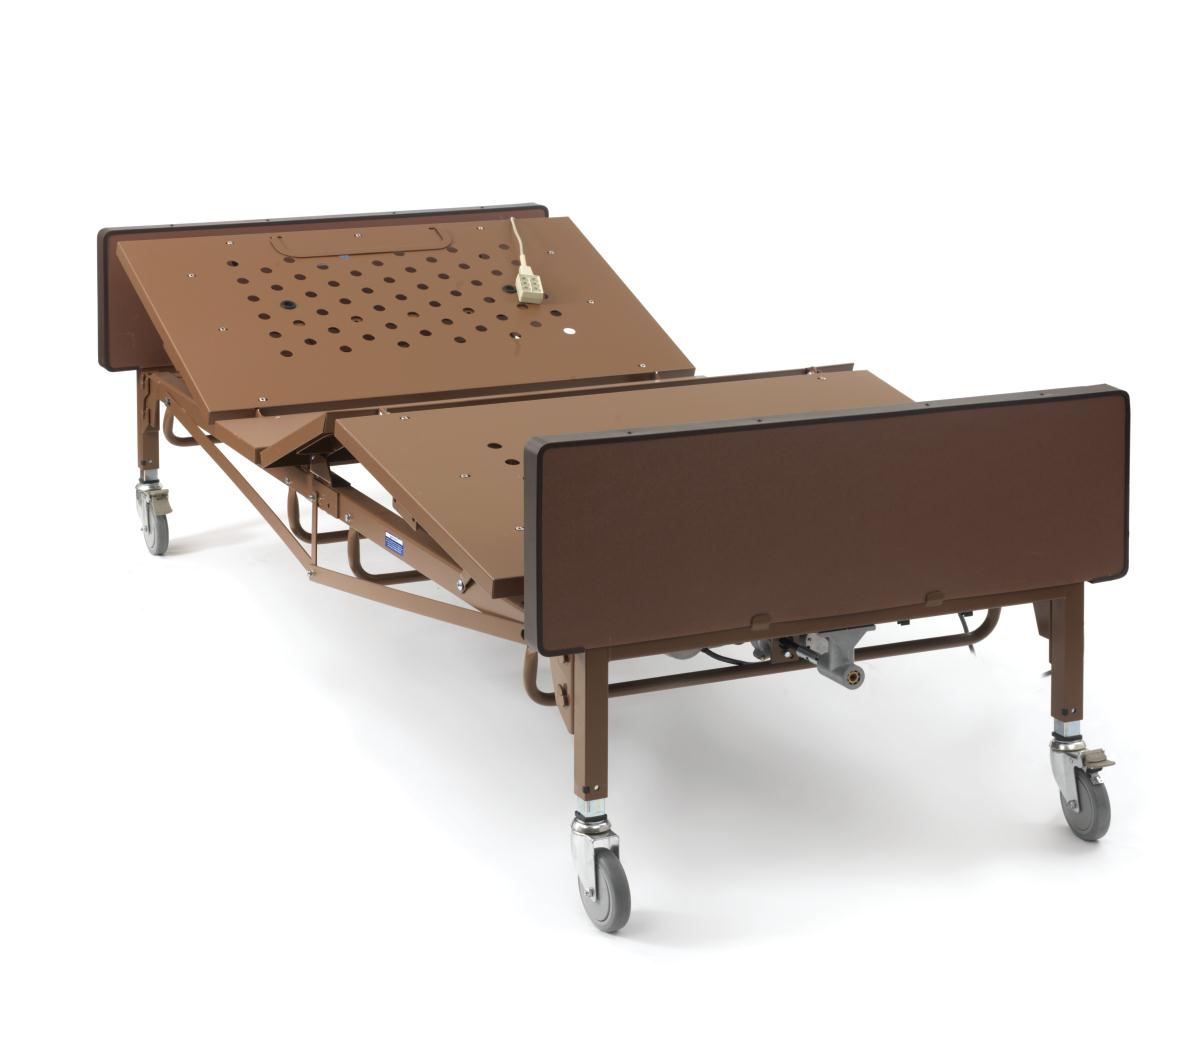 42" Bariatric Full Electric Hospital Bed, 18"-26.5" Height Range